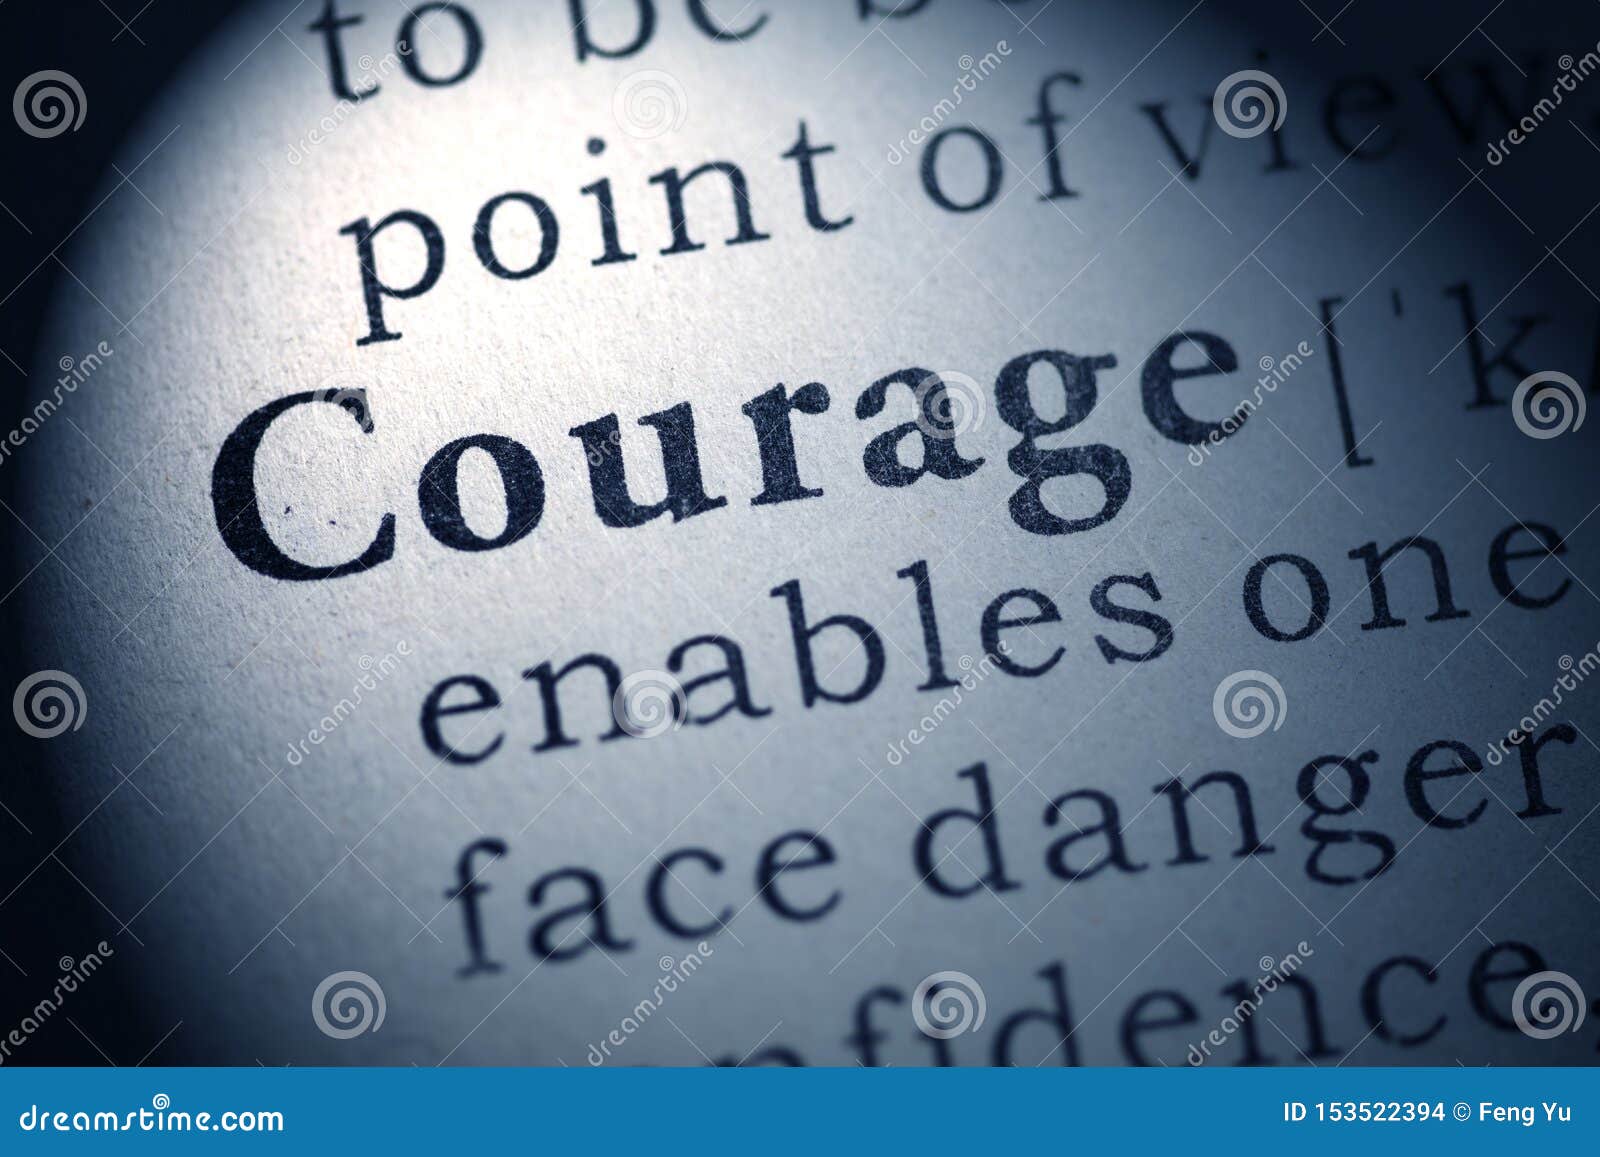 extended definition of courage